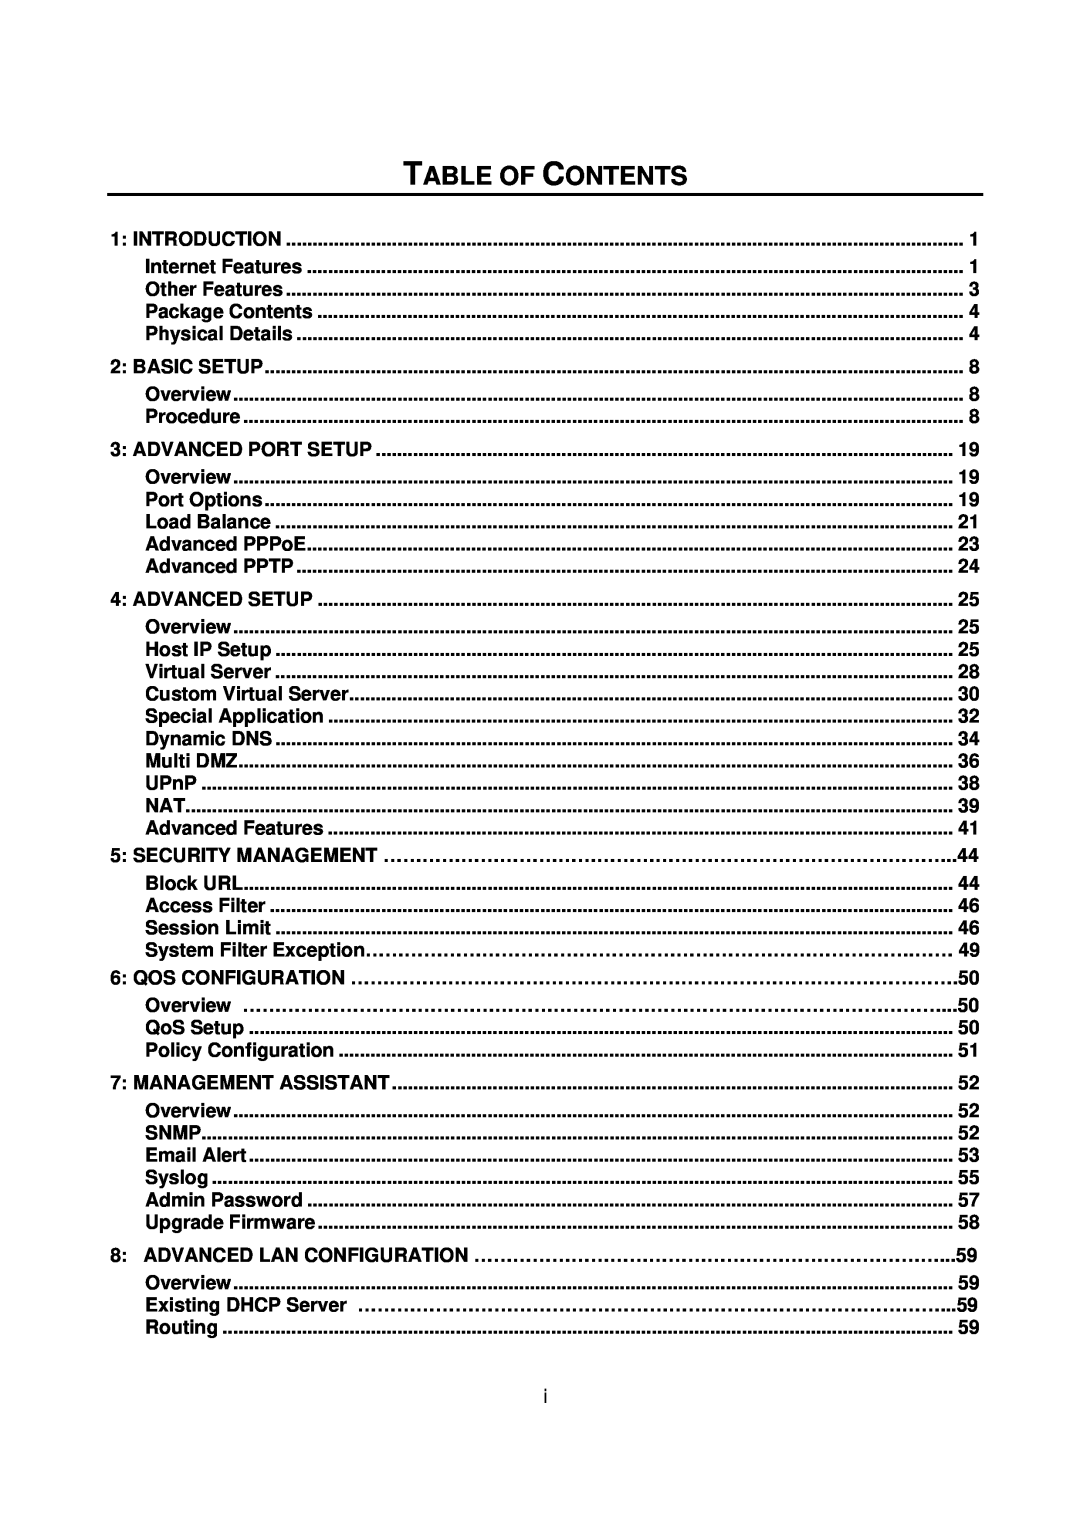 Edimax Technology Edimax user guide Router manual SECURITY MANAGEMENT ……………………………………………………………………………..44, Table Of Contents 